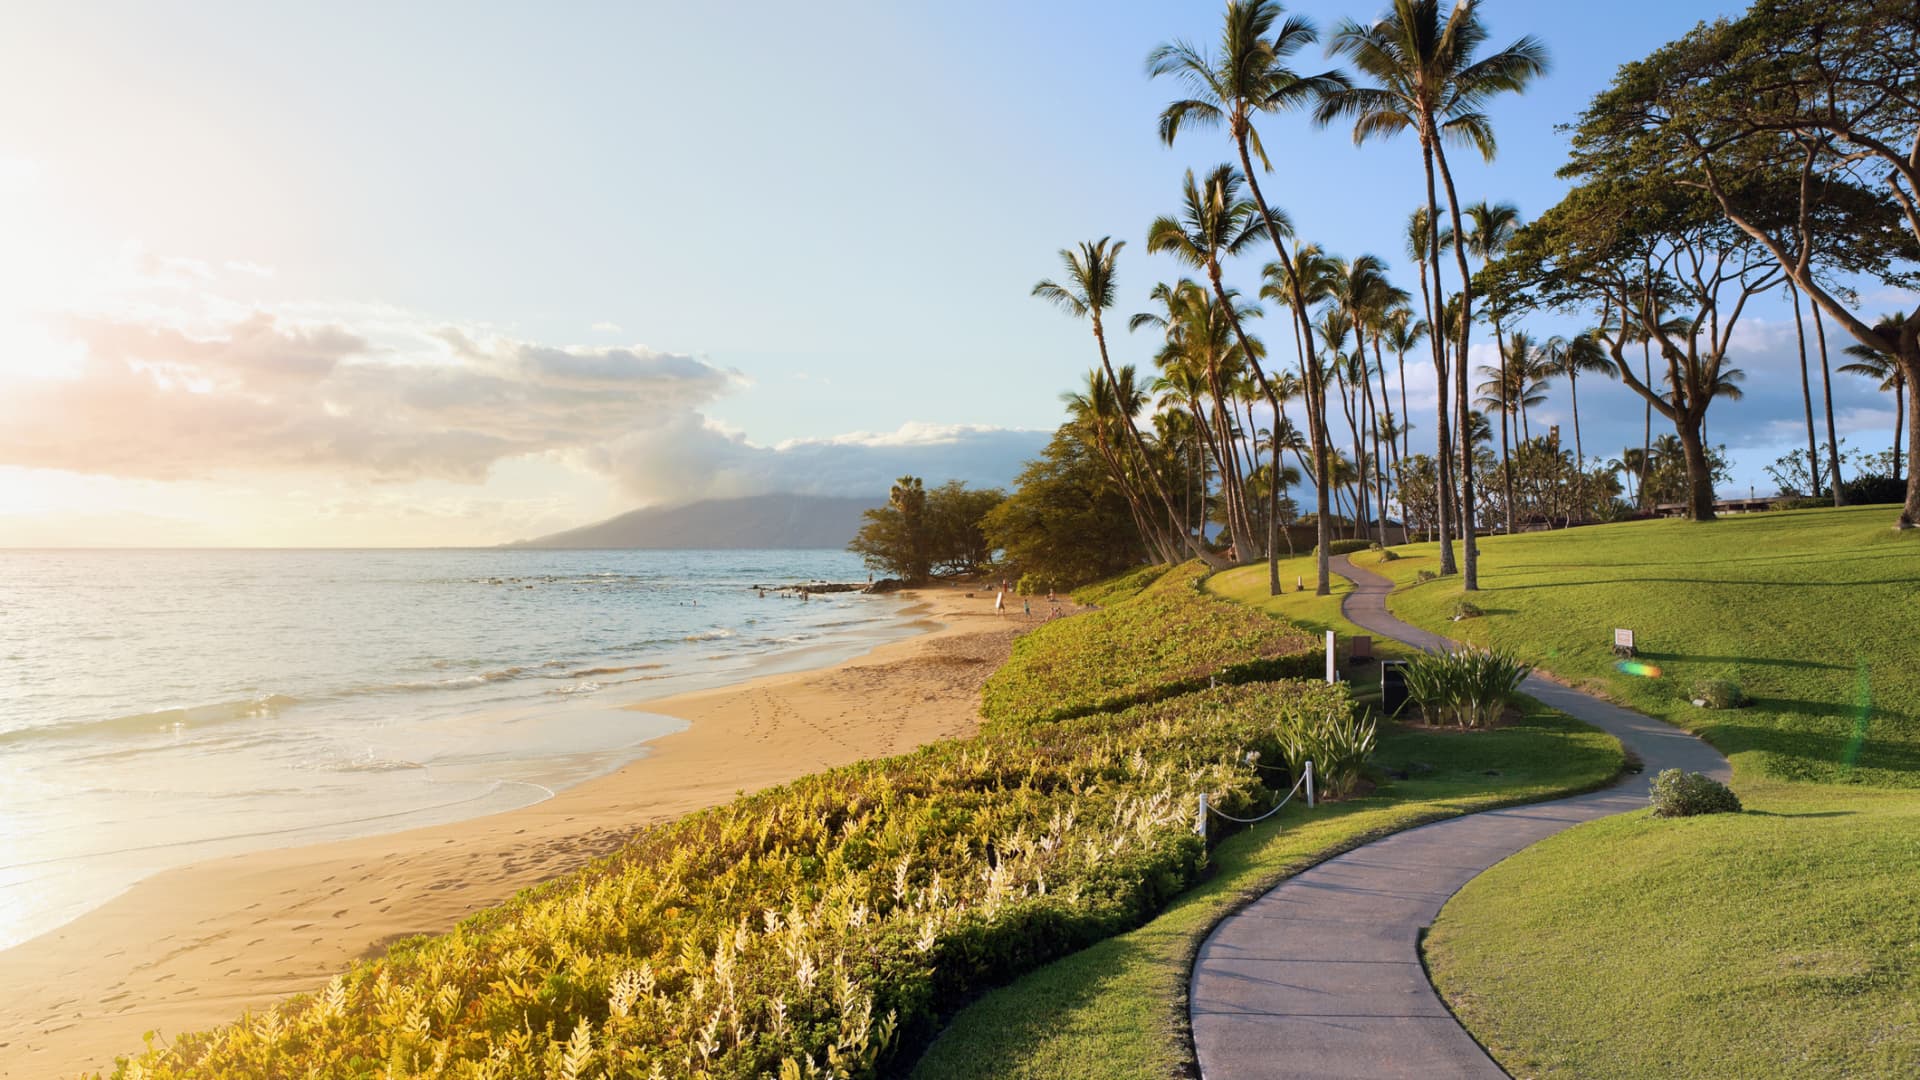 California, the Caribbean and other warm weather locations are popular for Christmas travel this year, however Hawaii is the most in-demand destination for American travelers, according to Similarweb.